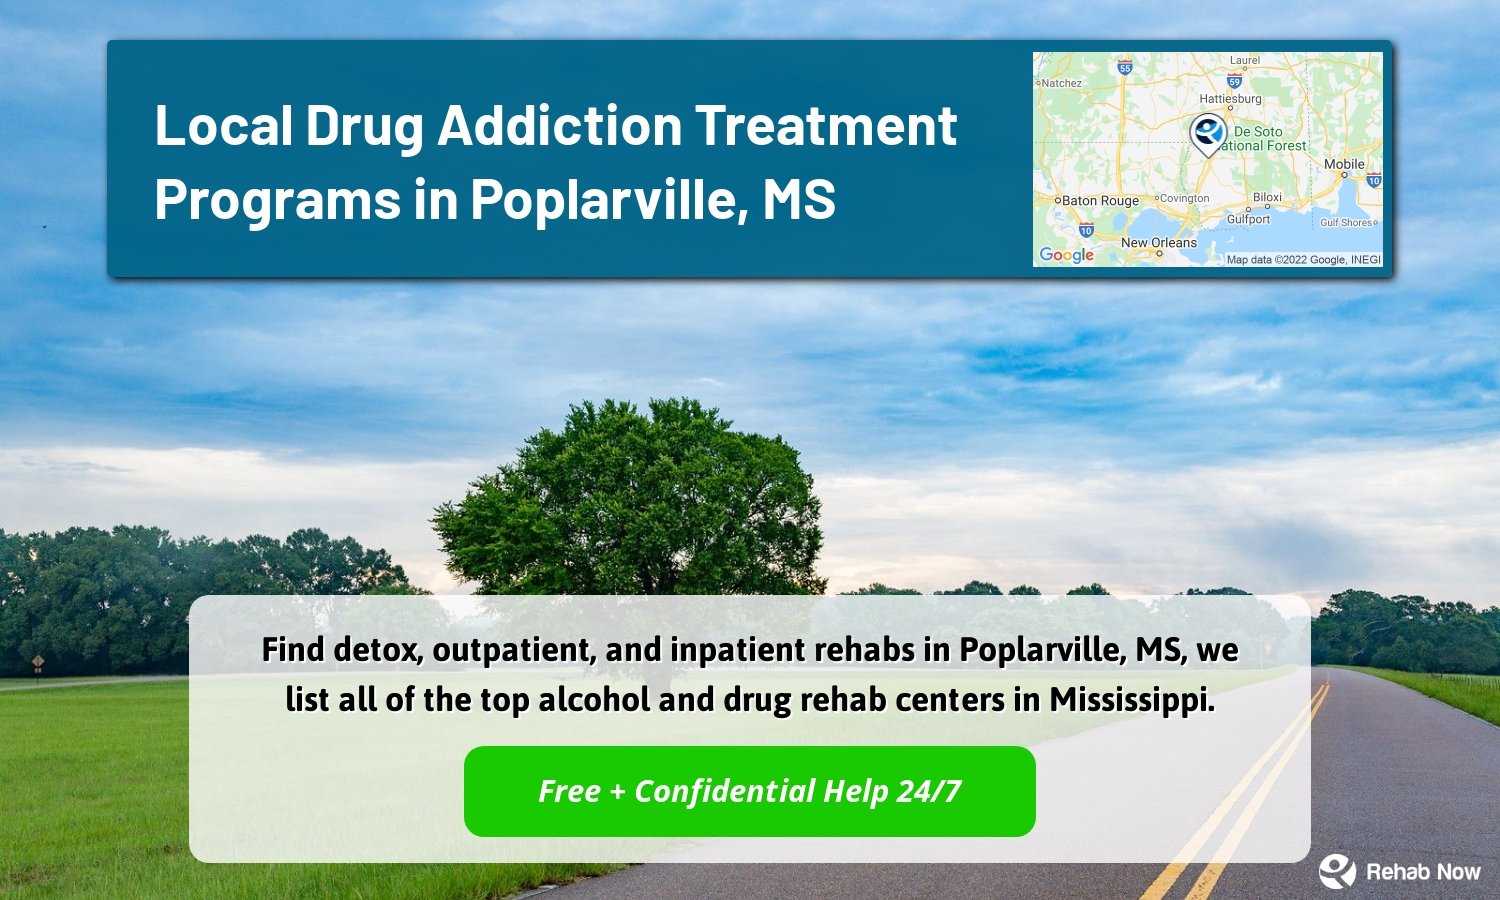 Find detox, outpatient, and inpatient rehabs in Poplarville, MS, we list all of the top alcohol and drug rehab centers in Mississippi.